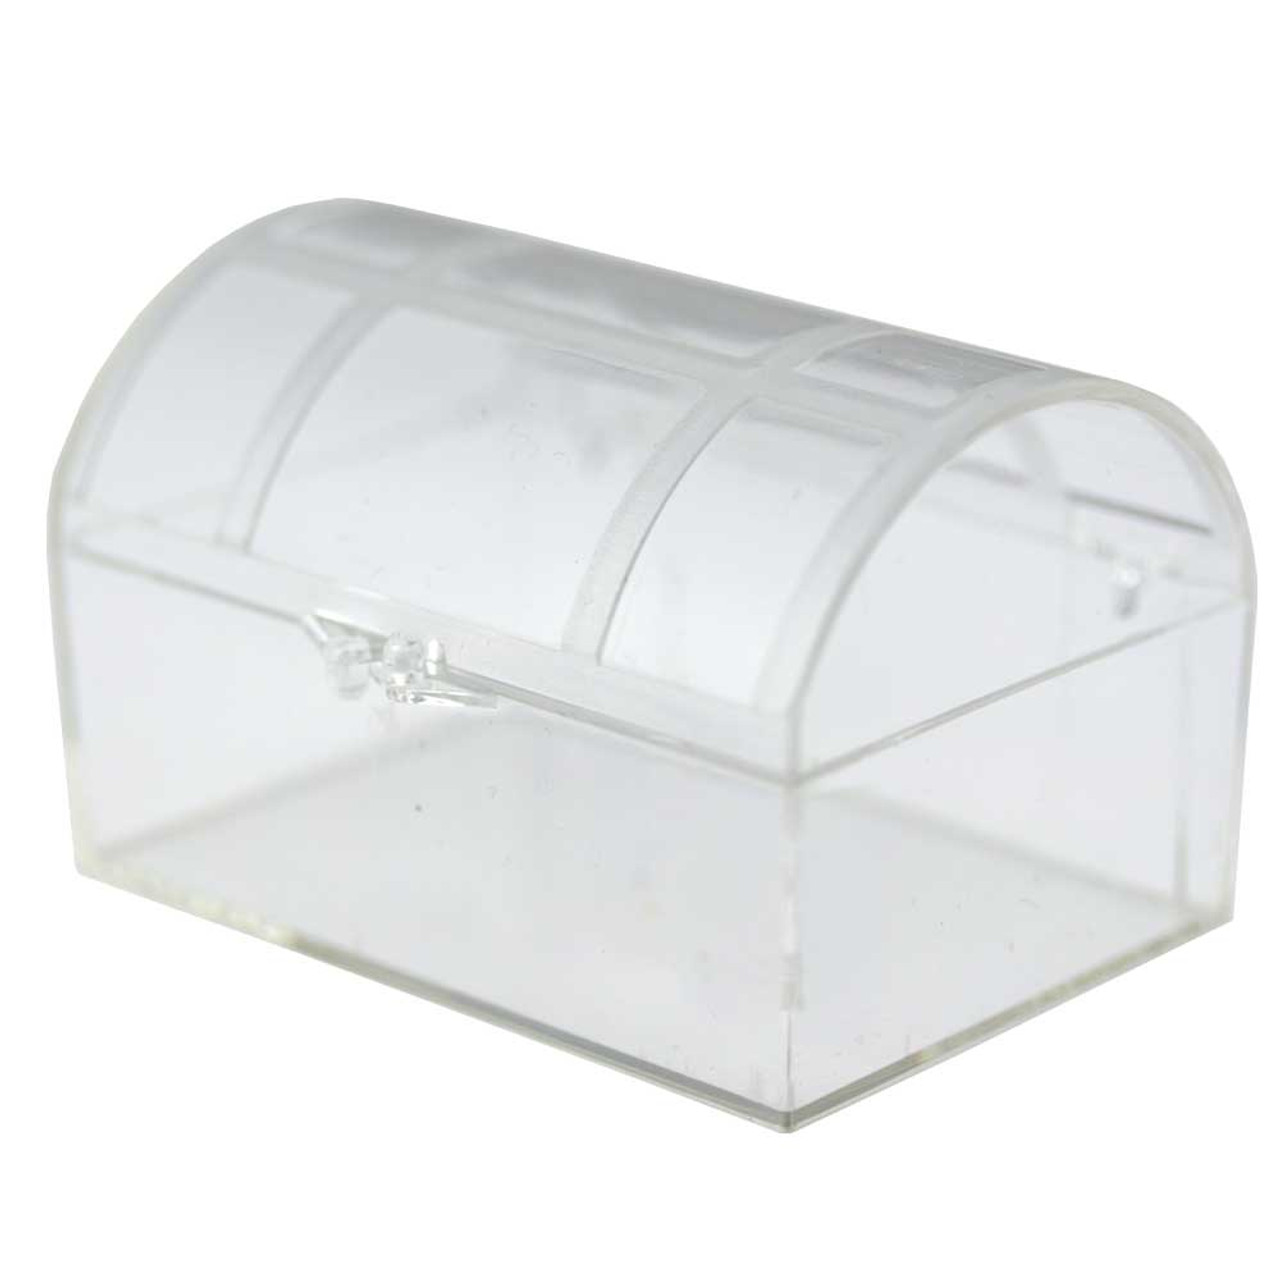 Clearance Gem small clear storage containers